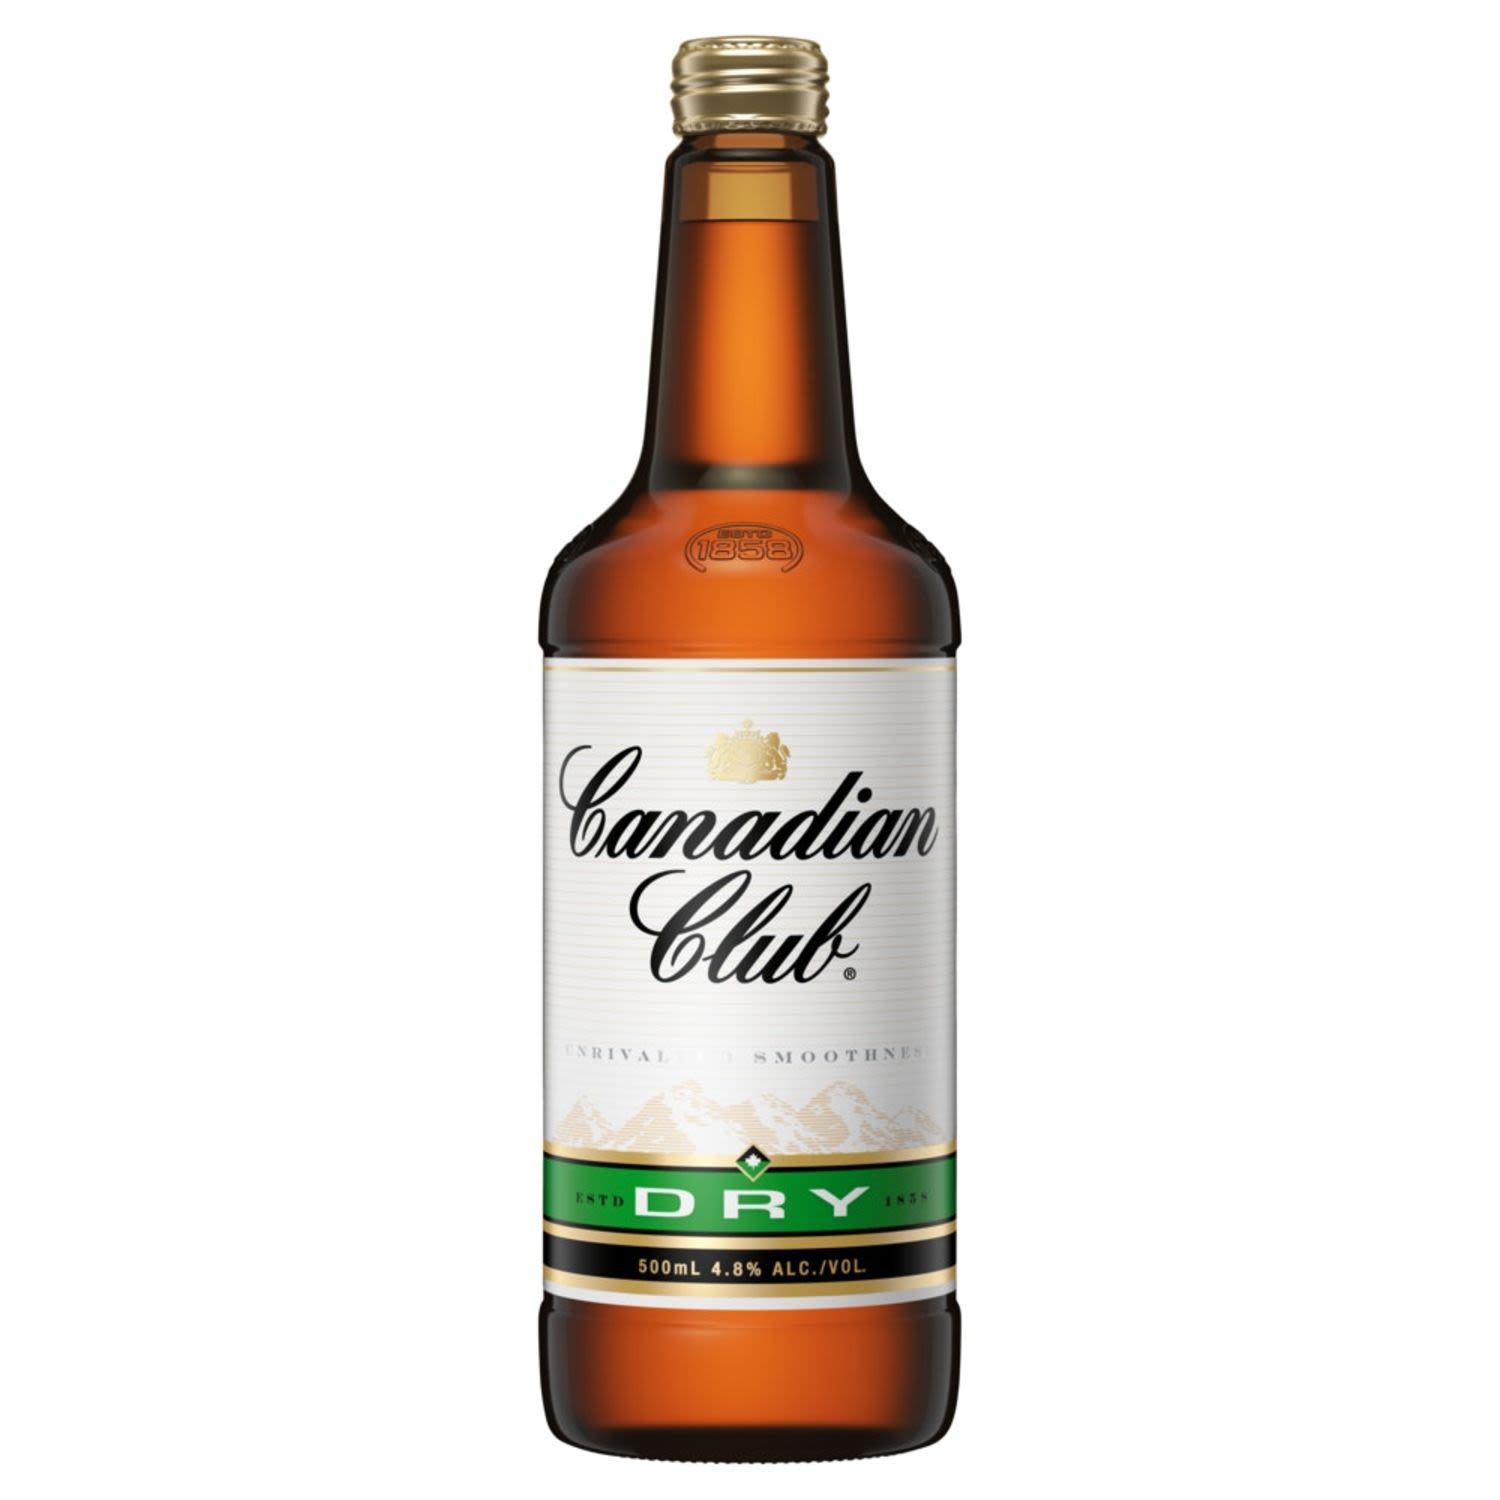 Canadian Club Whisky RTD comes as a blend of six-year-old Canadian Club and Dry Ginger Ale. Enjoy chilled or poured over ice for the ultimate refreshment.<br /> <br />Alcohol Volume: 4.80%<br /><br />Pack Format: Bottle<br /><br />Standard Drinks: 2</br /><br />Pack Type: Bottle<br />